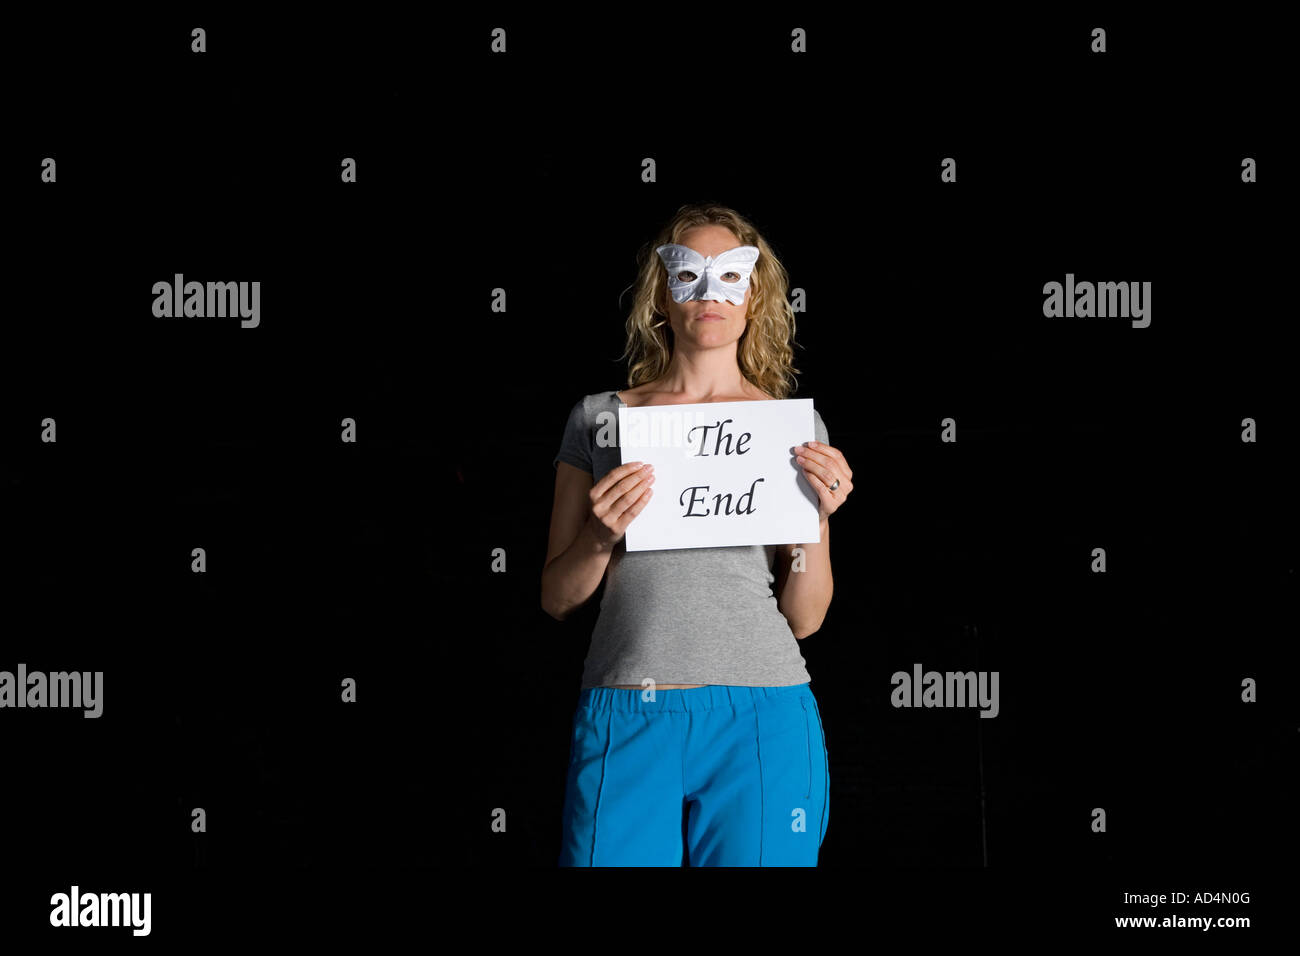 A woman holding a sign for 'The End' Stock Photo